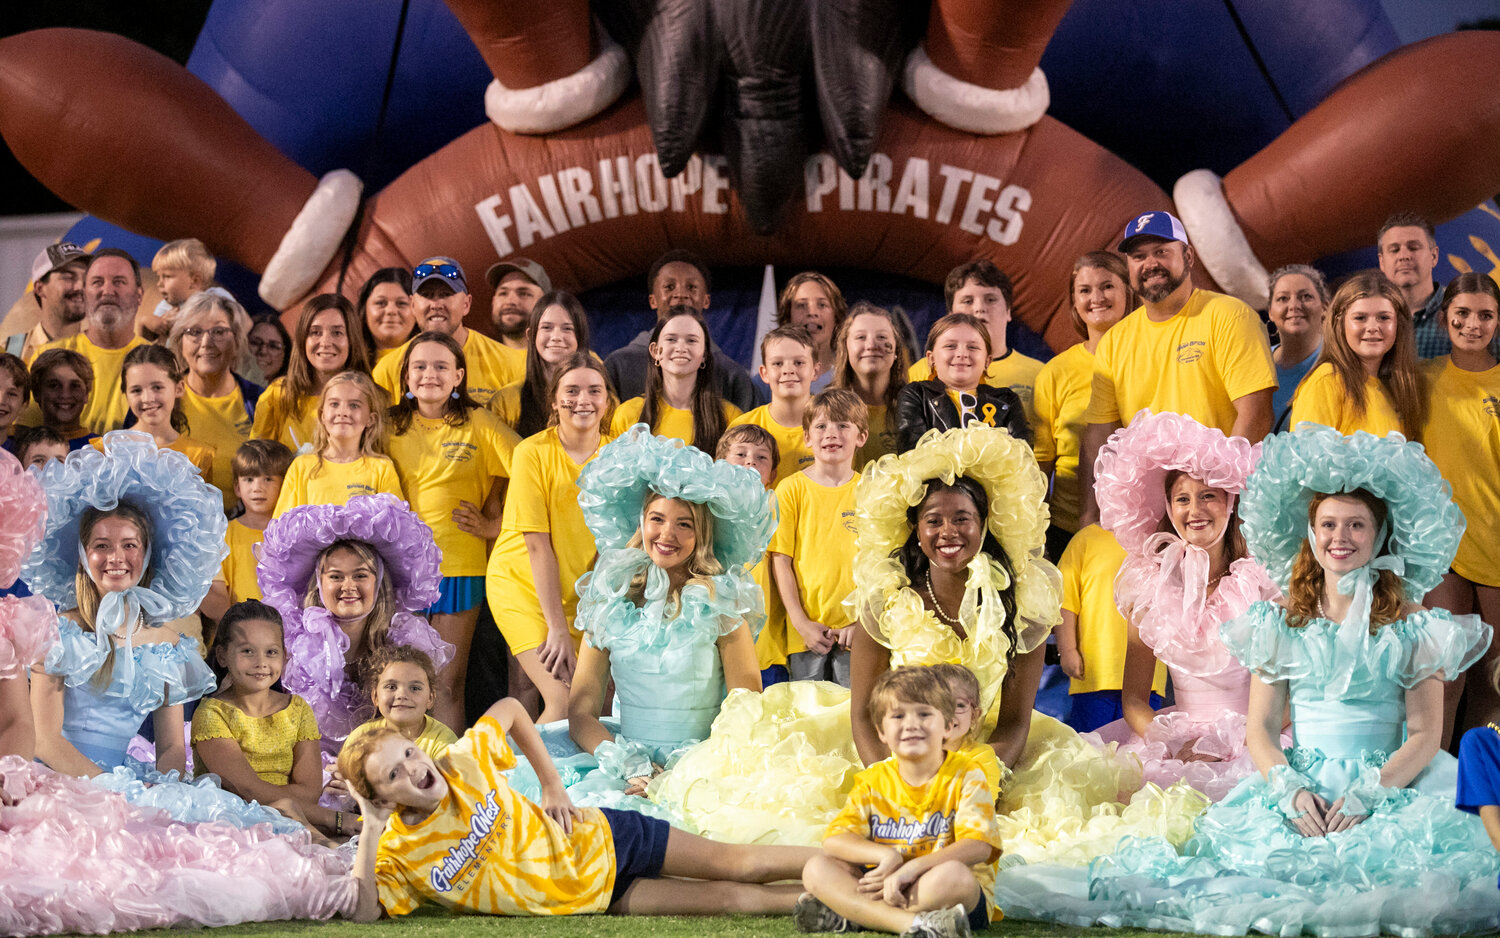 The 10th-annual Spina Bifida Awareness Game gathered for a photo in front of the Pirate inflatable Friday night at Fairhope Municipal Stadium. The event surpassed its fundraising goal and donated $10,500 to help families local and statewide with medical and non-medical expenses.